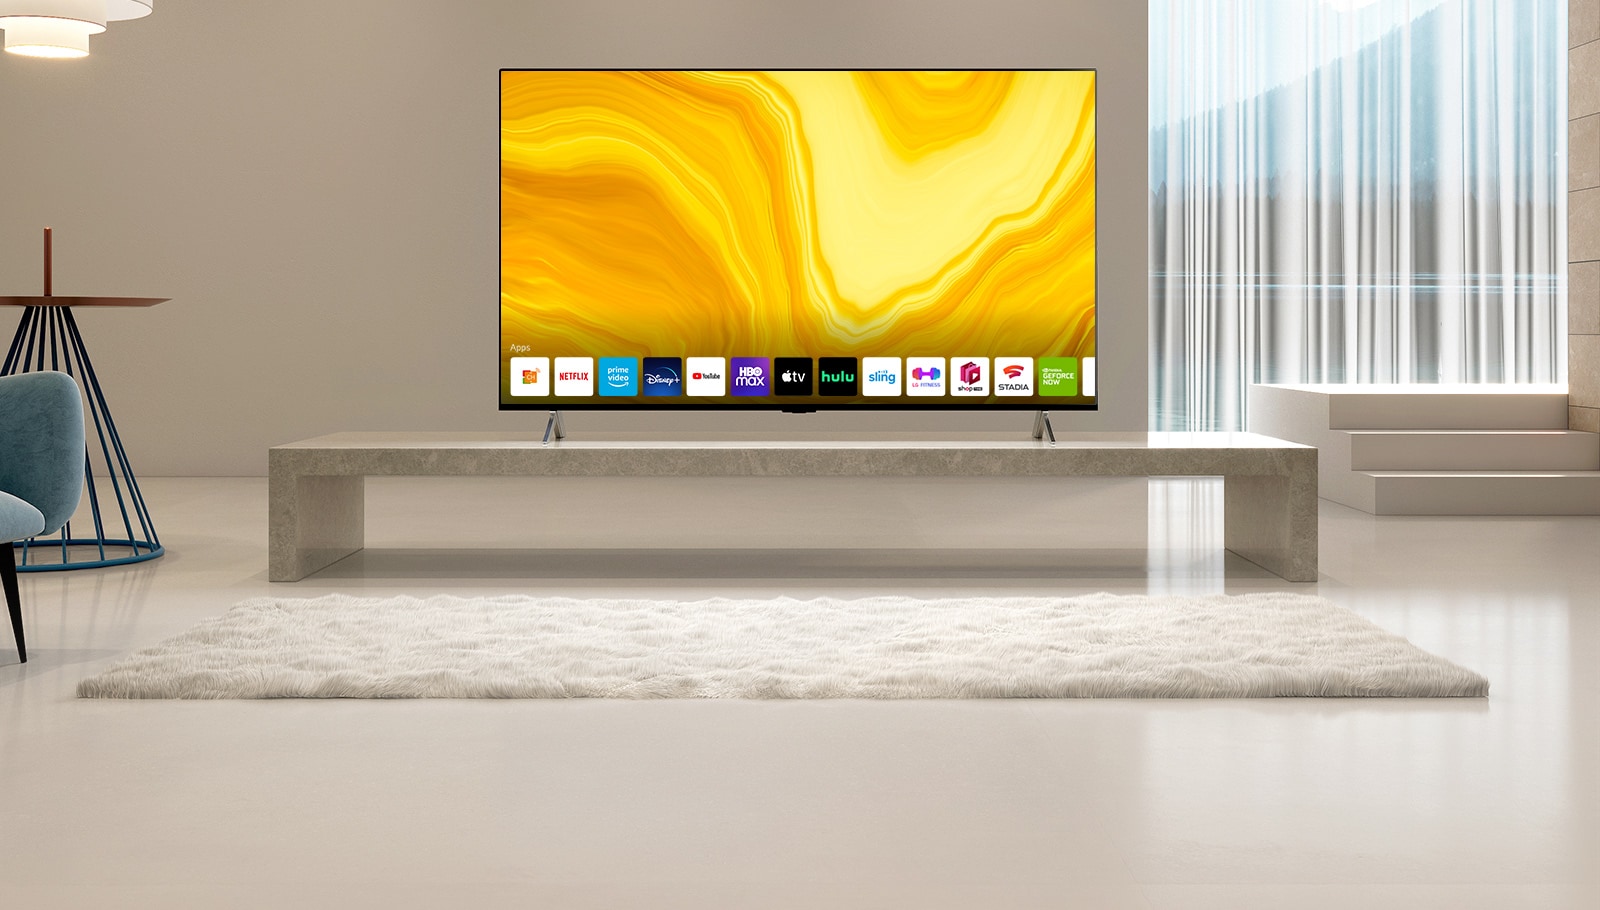 The main screen shows the user interface. The scene changes to show a television set up in a yellow living room.